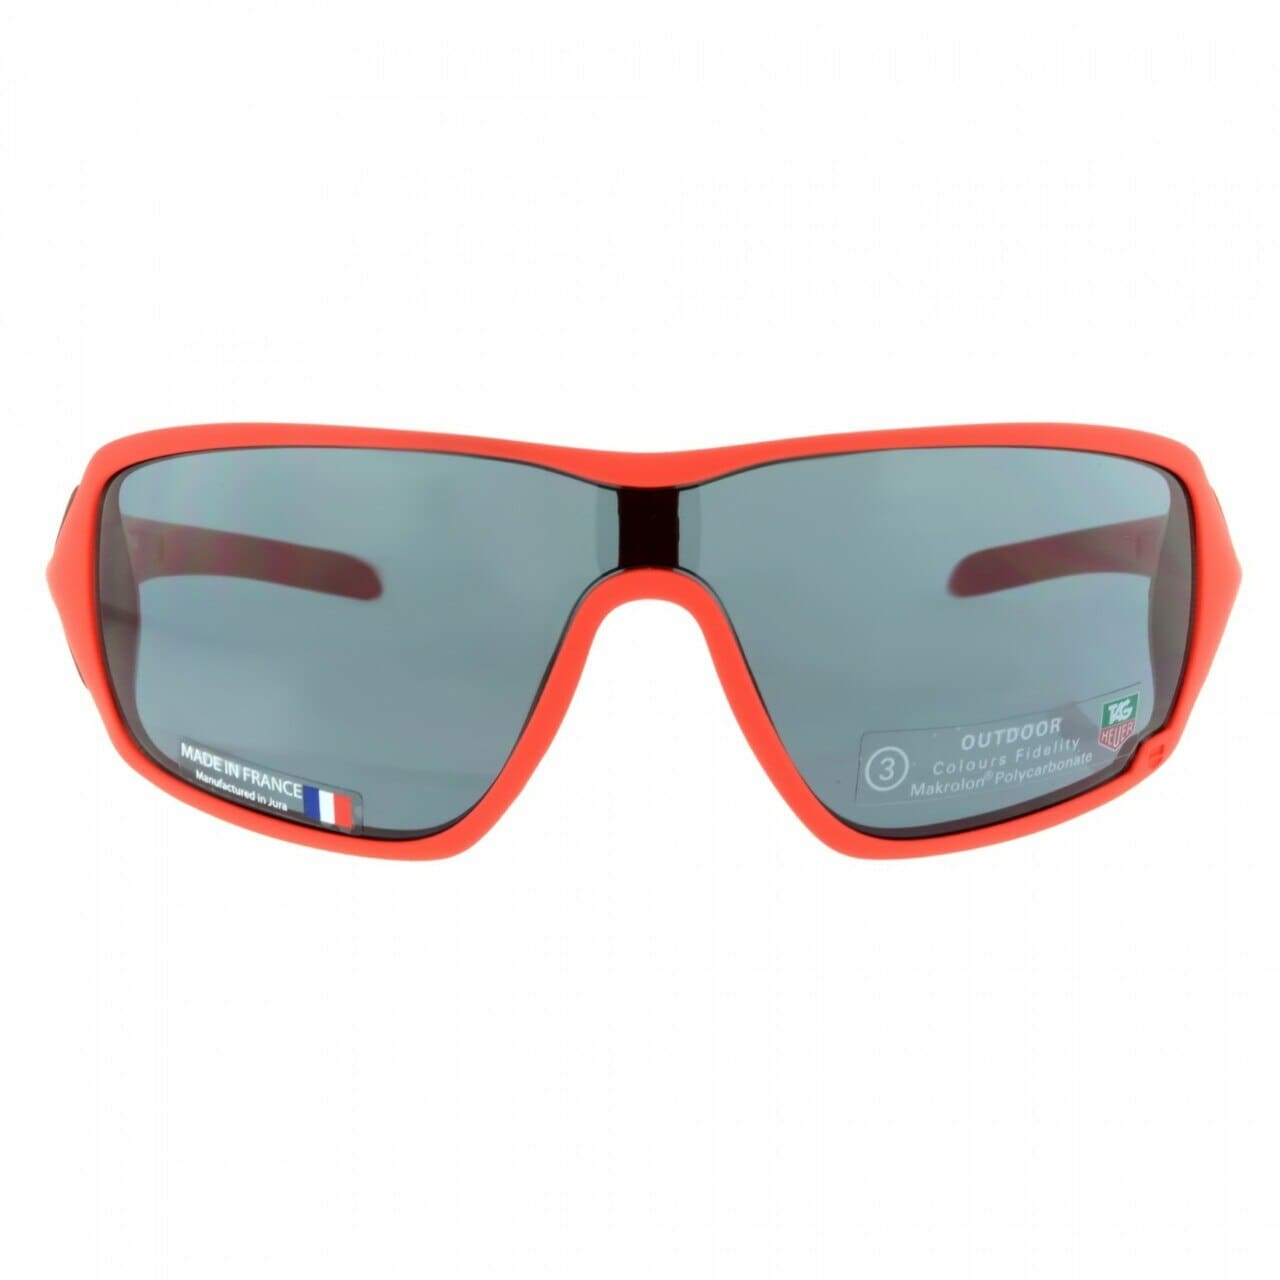 TAG Heuer 9201-107 Racer Red Shield Grey Lens Wrap Sunglasses 66920110768003